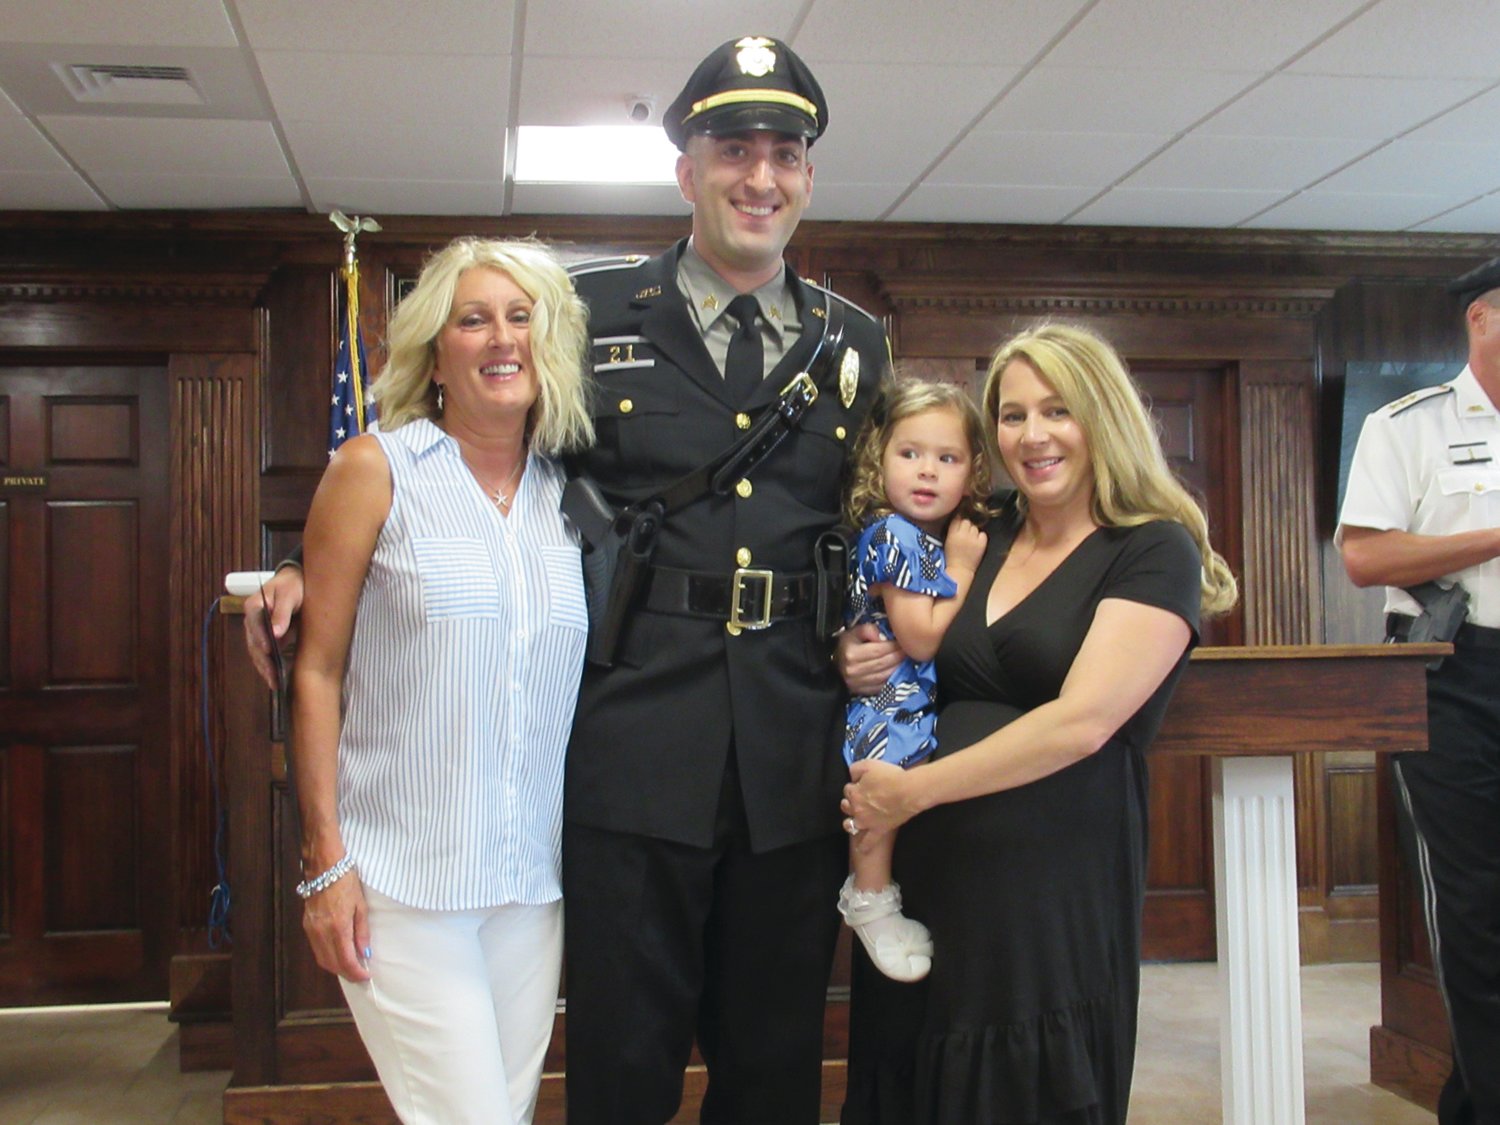 MEMORABLE MOMENT: Andrew Broccoli, a 9-year veteran of the Johnston Police Department, is joined by his wonderful wife Harley, their 2-year-old daughter Ryleigh and his mother Donna Broccoli after being promoted to the rank of sergeant.